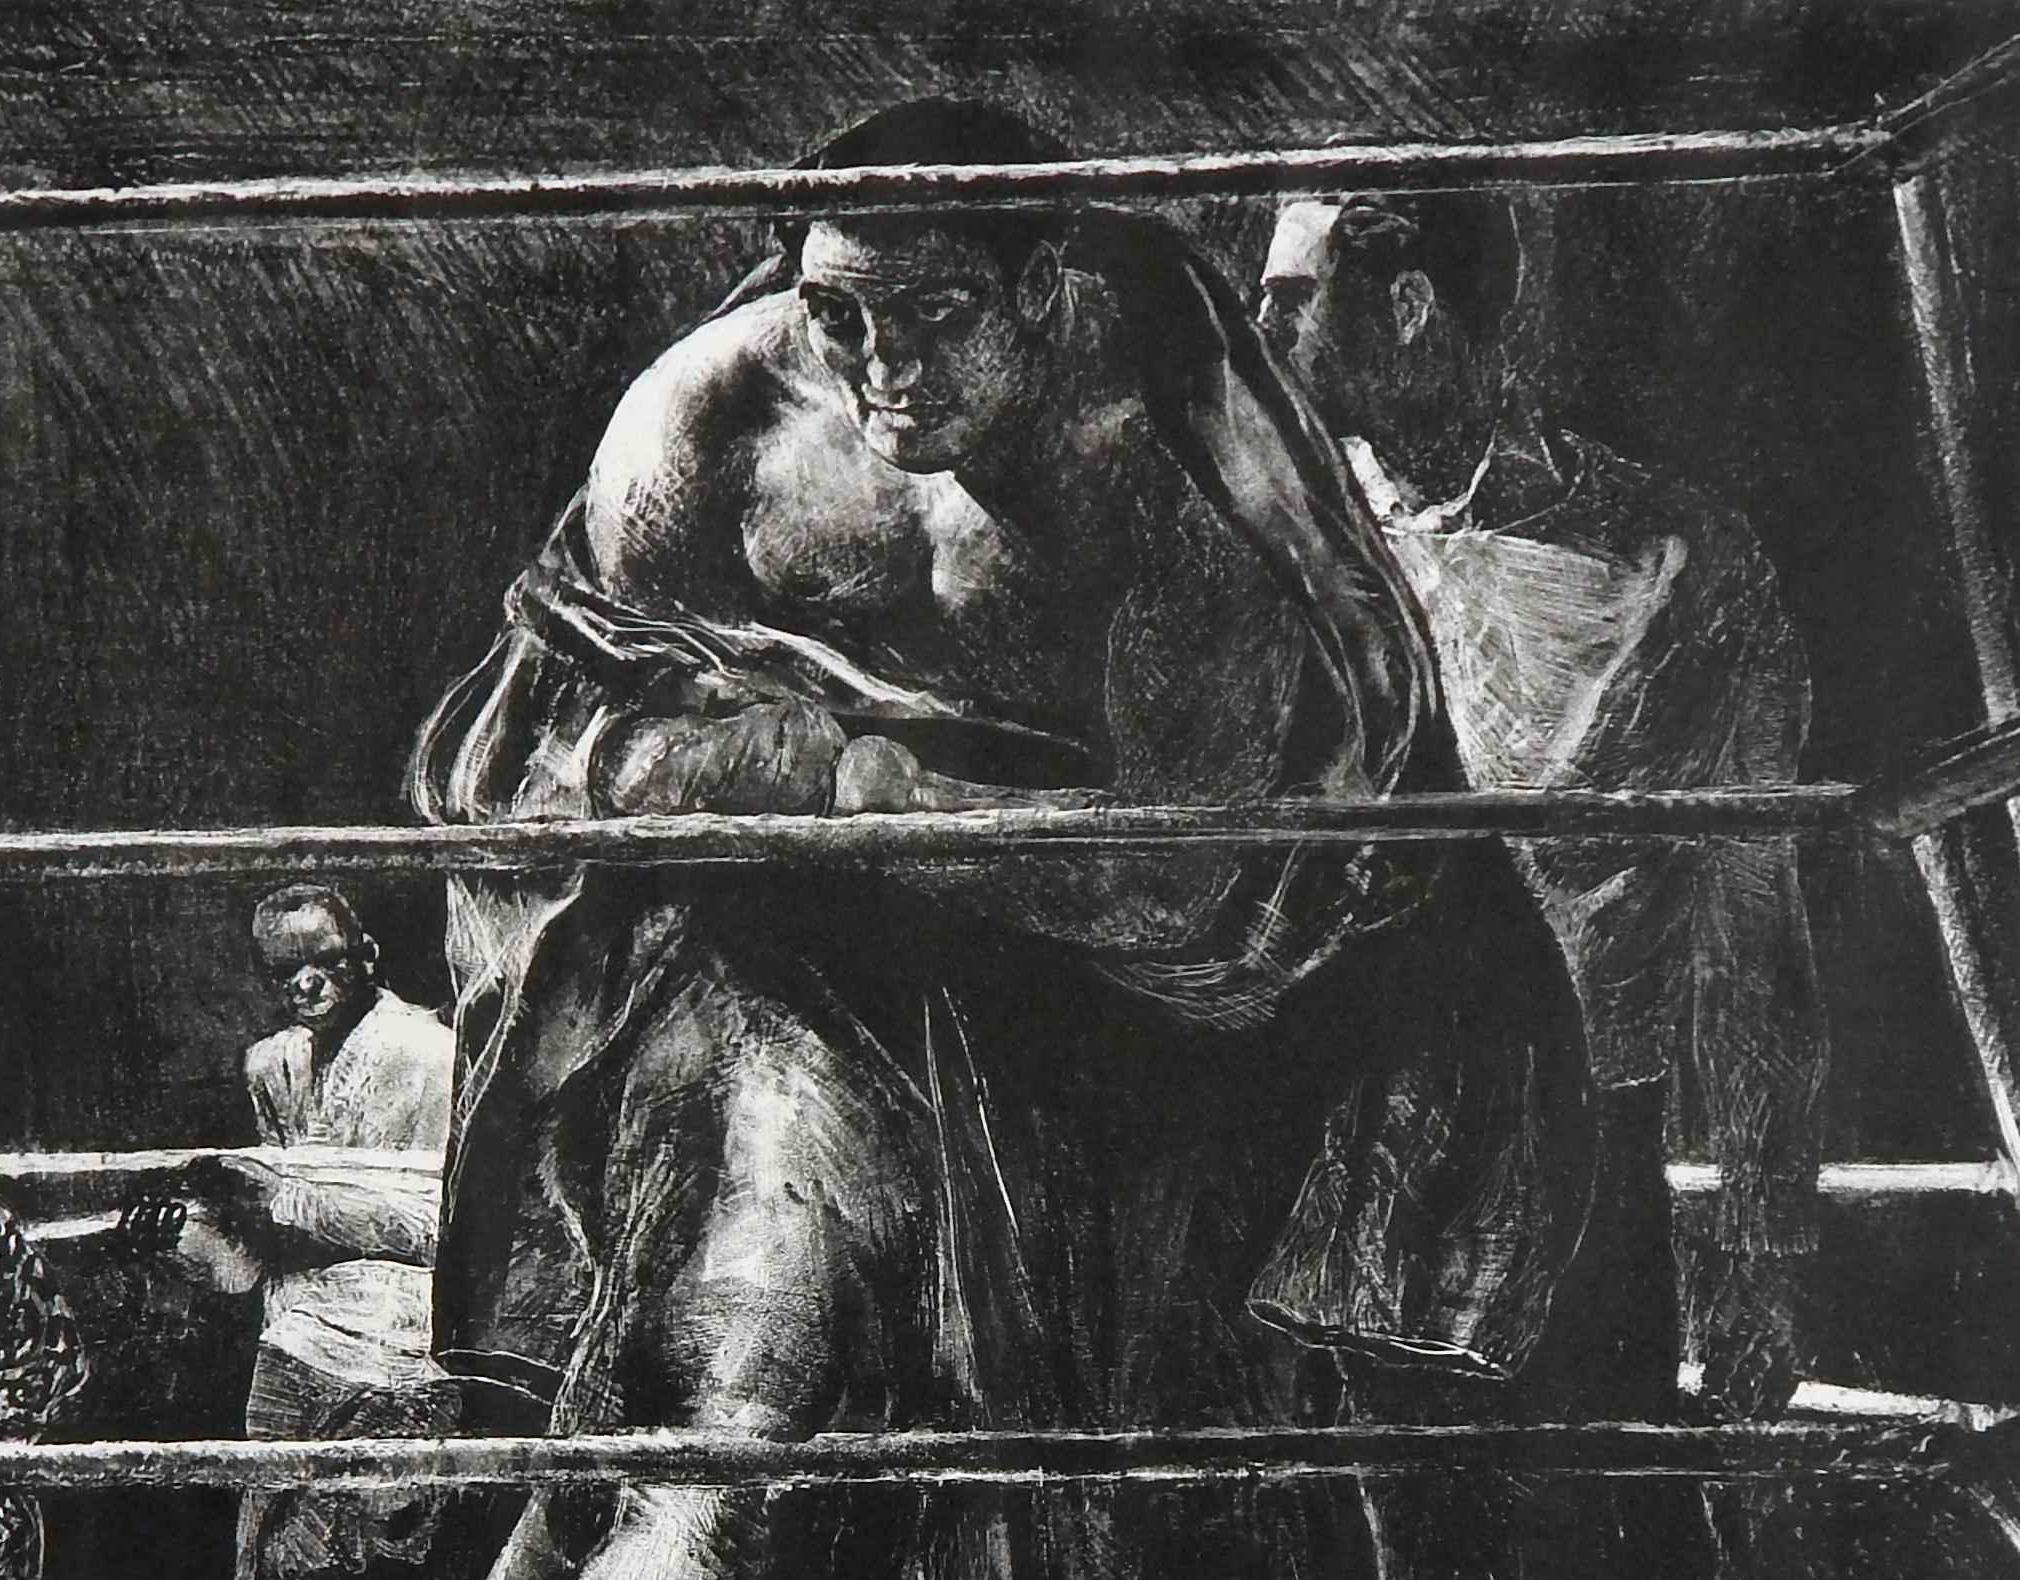 Boxing subject original stone lithograph by Robert Riggs (1896-1970)
Pencil titled lower left “Trial Horse”
Pencil signed lower right “Robert Riggs”
Image measures 13 1/2